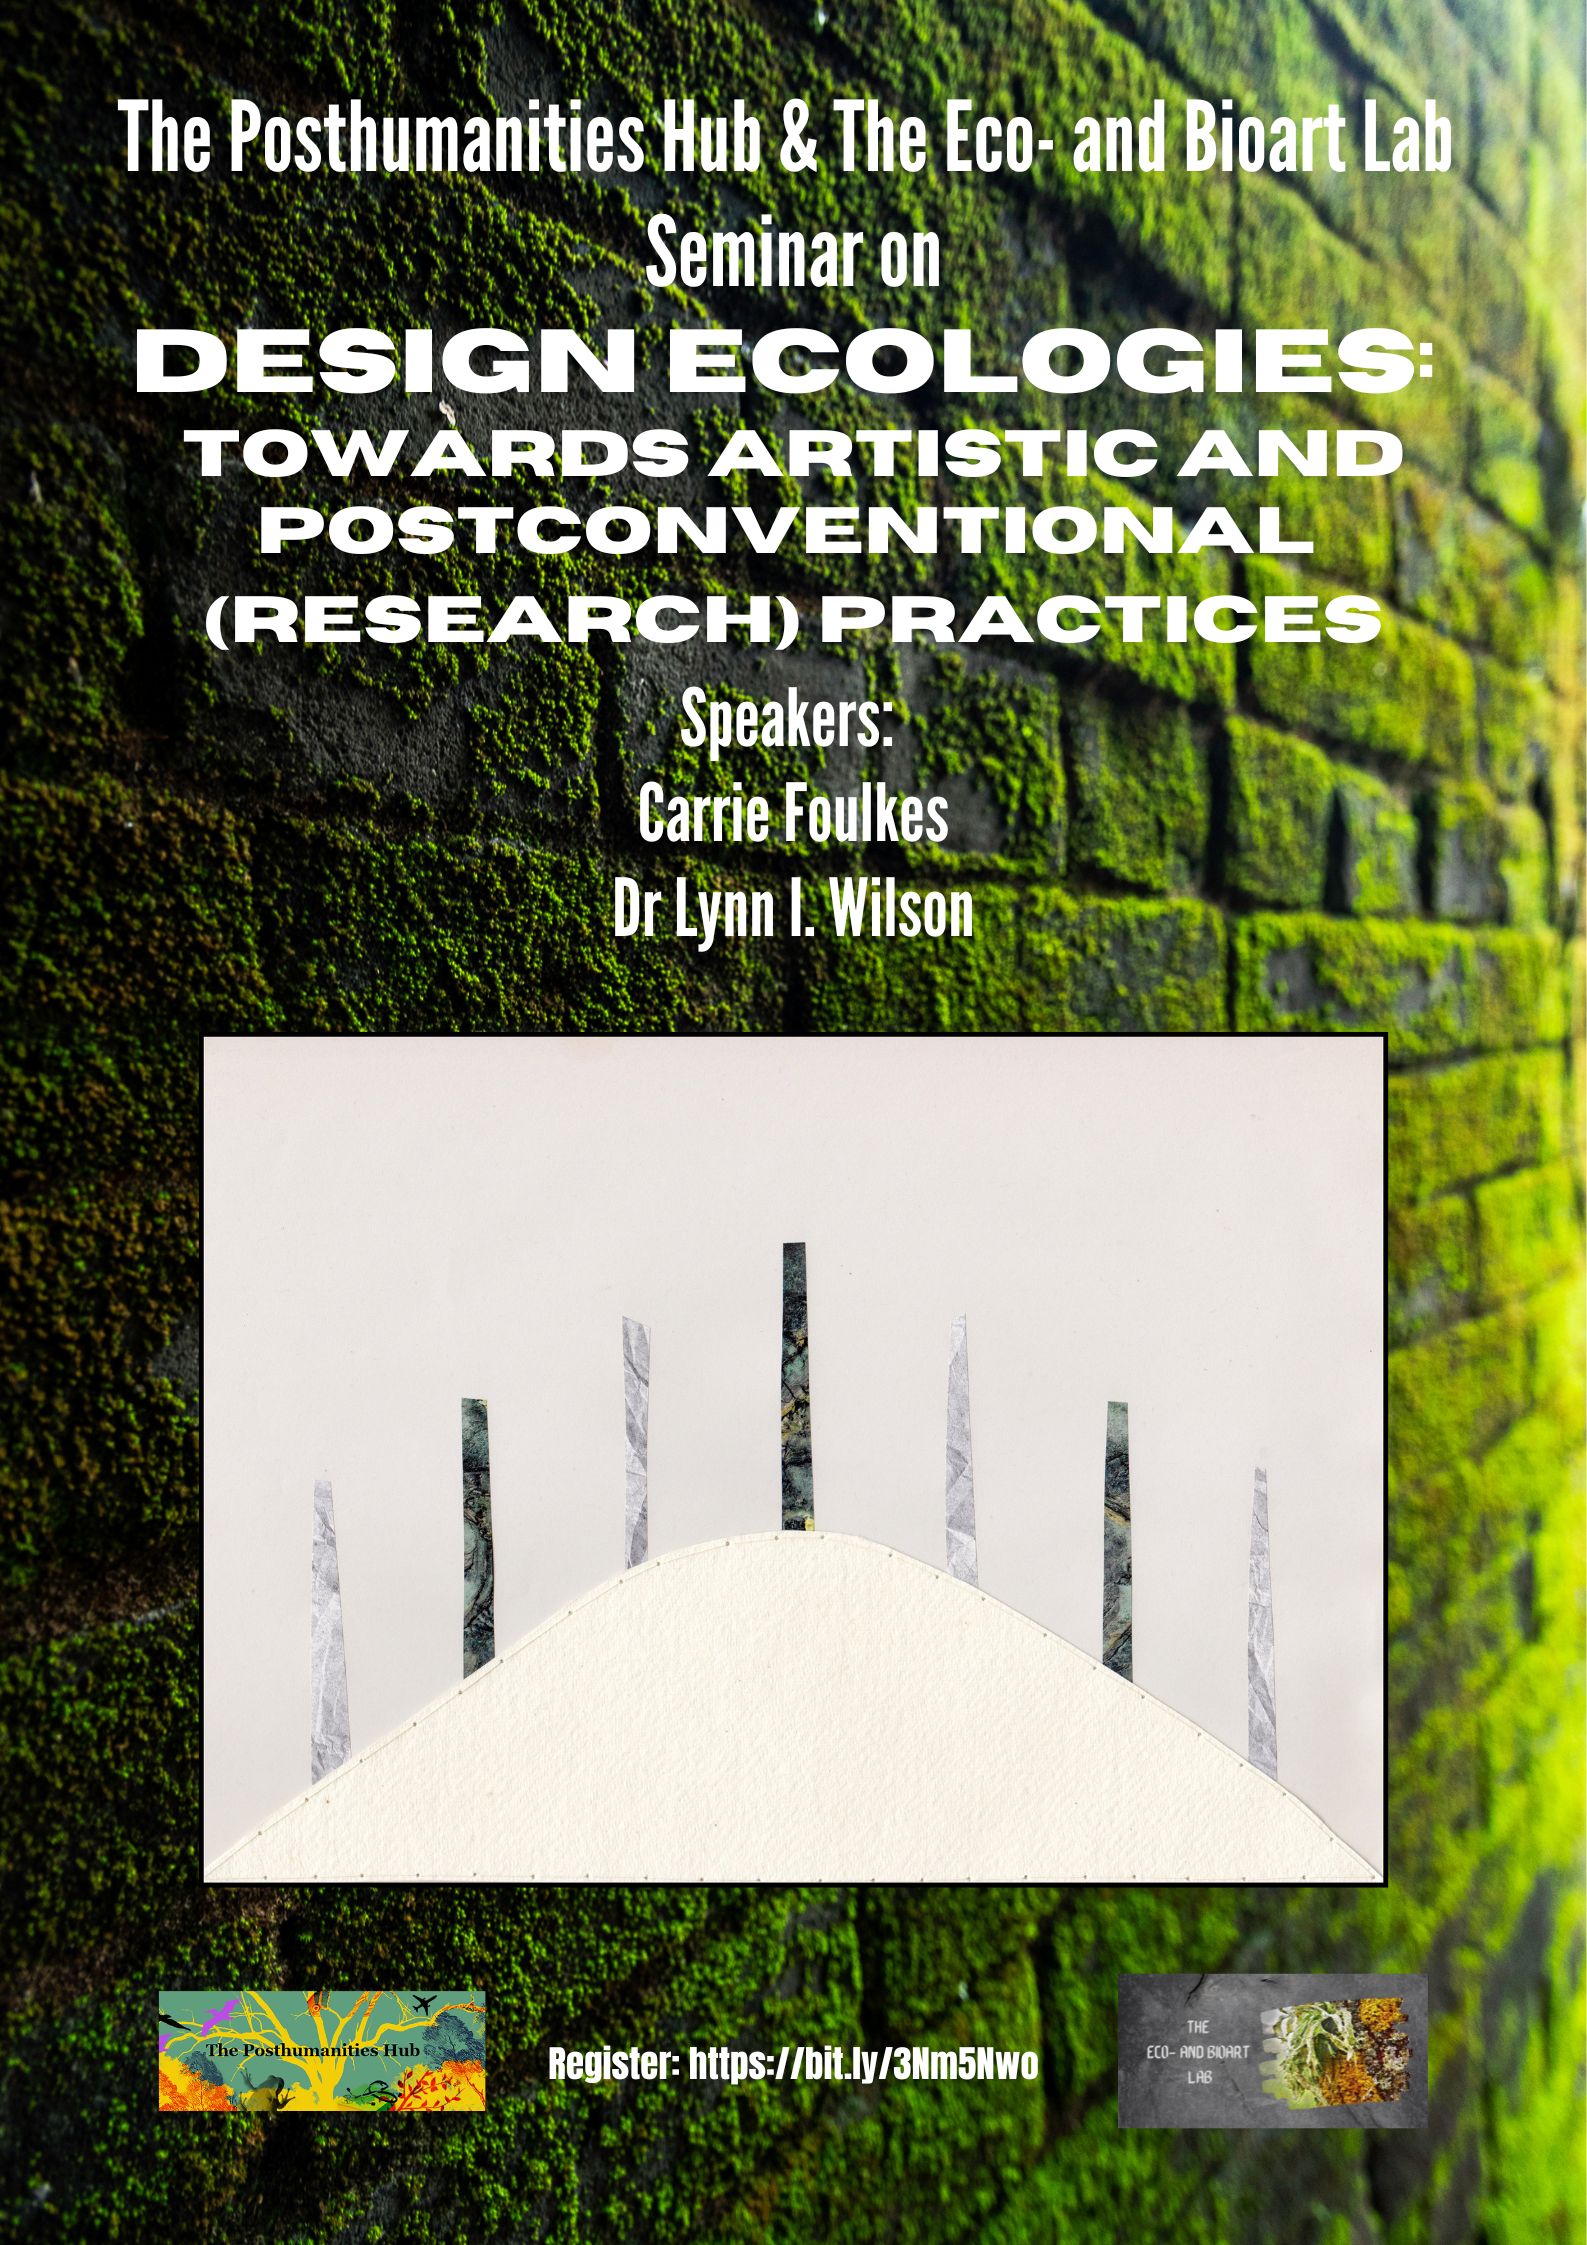 PH & EBL hybrid seminar on “Design Ecologies: Towards Artistic and Postconventional (Research) Practices”, 14th June!